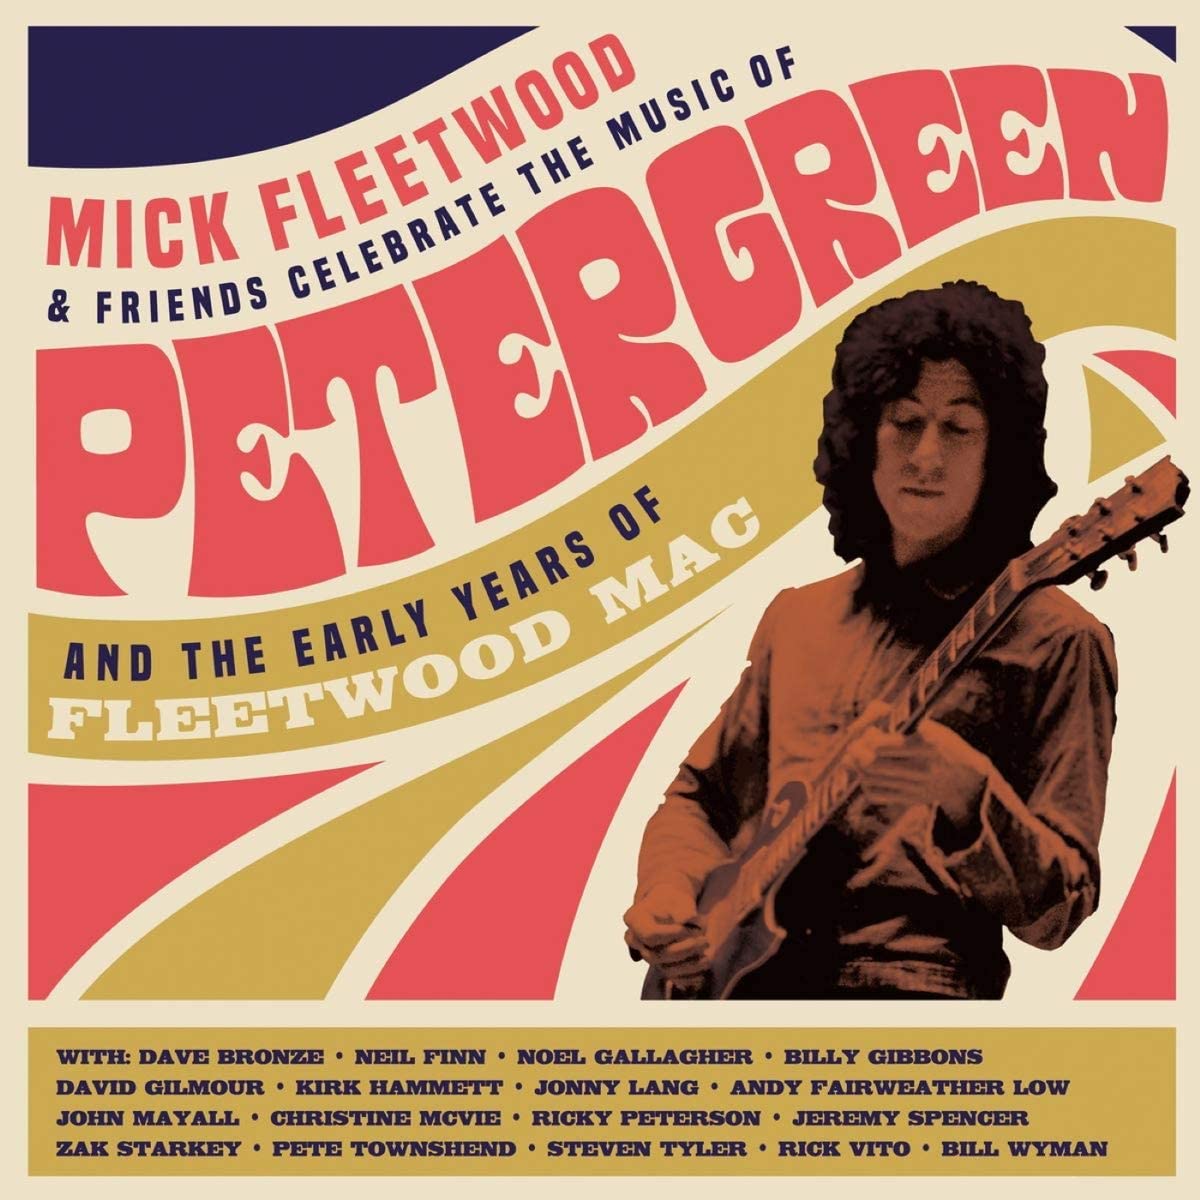 MICK FLEETWOOD & FRIENDS - Celebrate The Music of Peter Green and the Early Years of Fleetwood Mac - 4LP - Vinyl